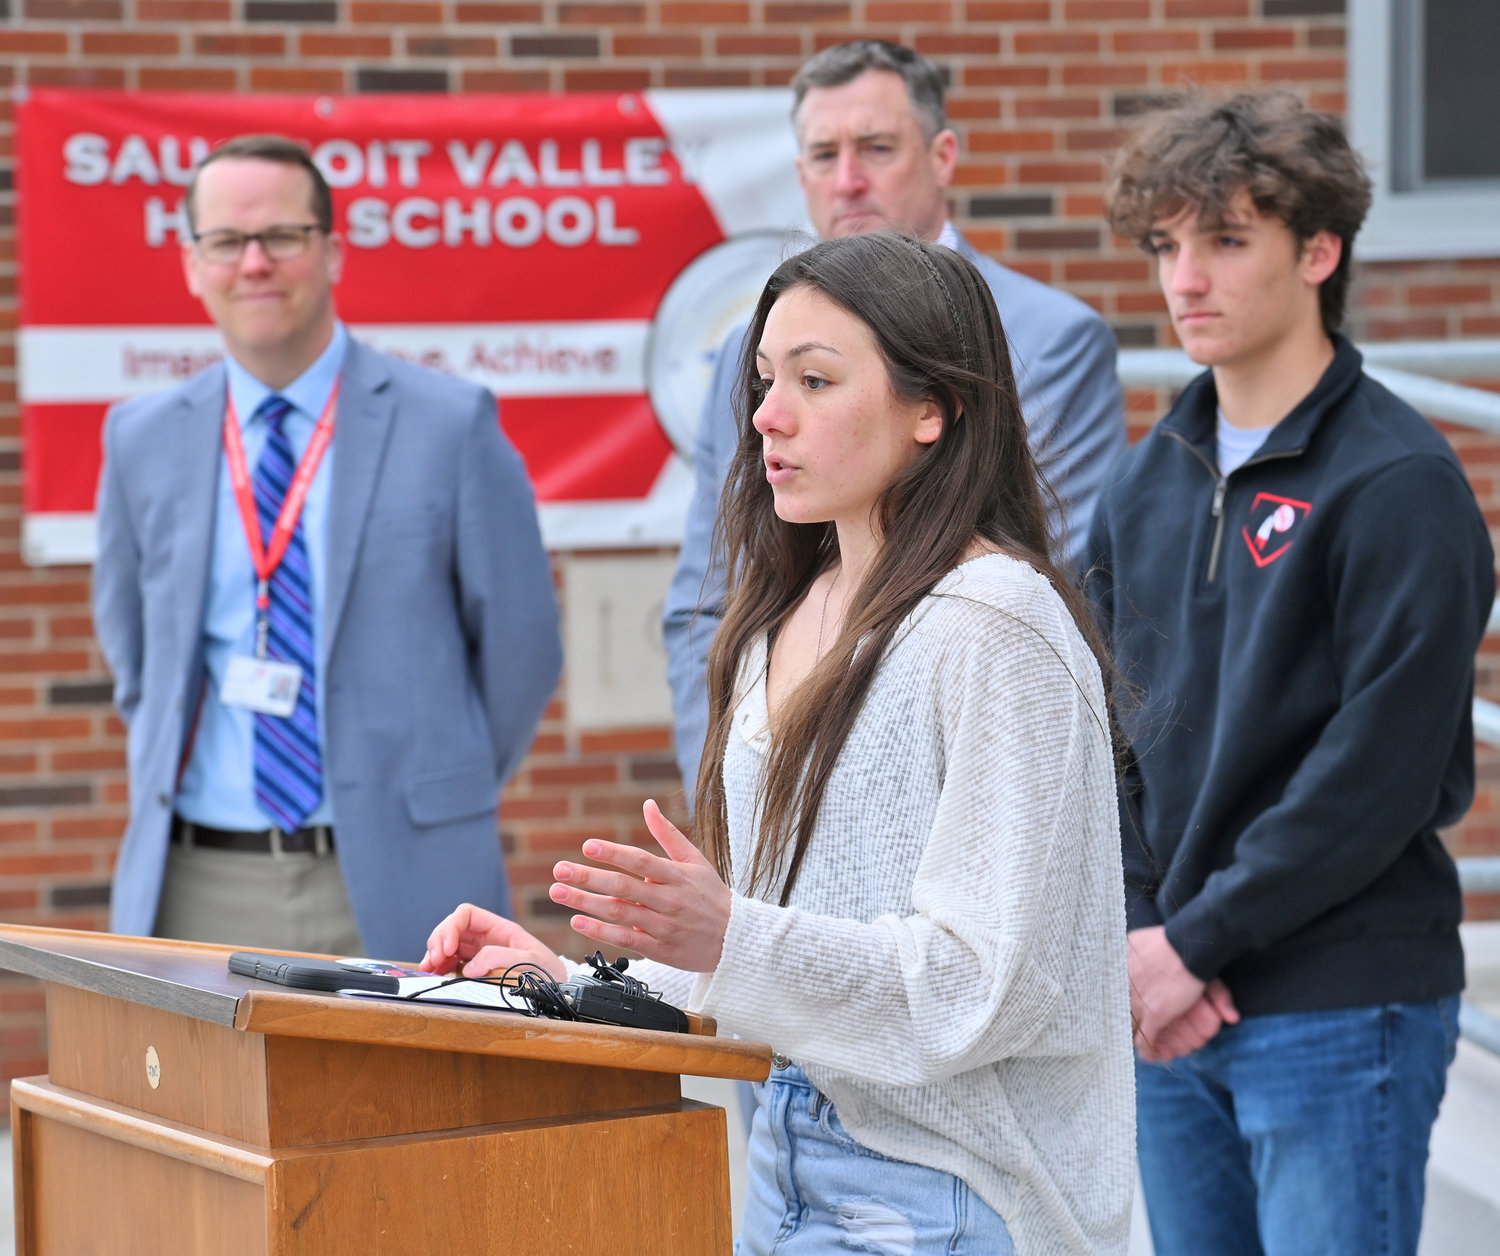 POWERFUL VOICES — Student council president Alena Weibel talks about the importance of staying safe during prom season at Sauquoit Valley High School on Friday, kicking off the No Empty Chair campaign for next week. Weibel was joined by, from left, Principal Brian Read, Superintendent Ronald Wheelock and senior class president Benjamin LoGalbo.